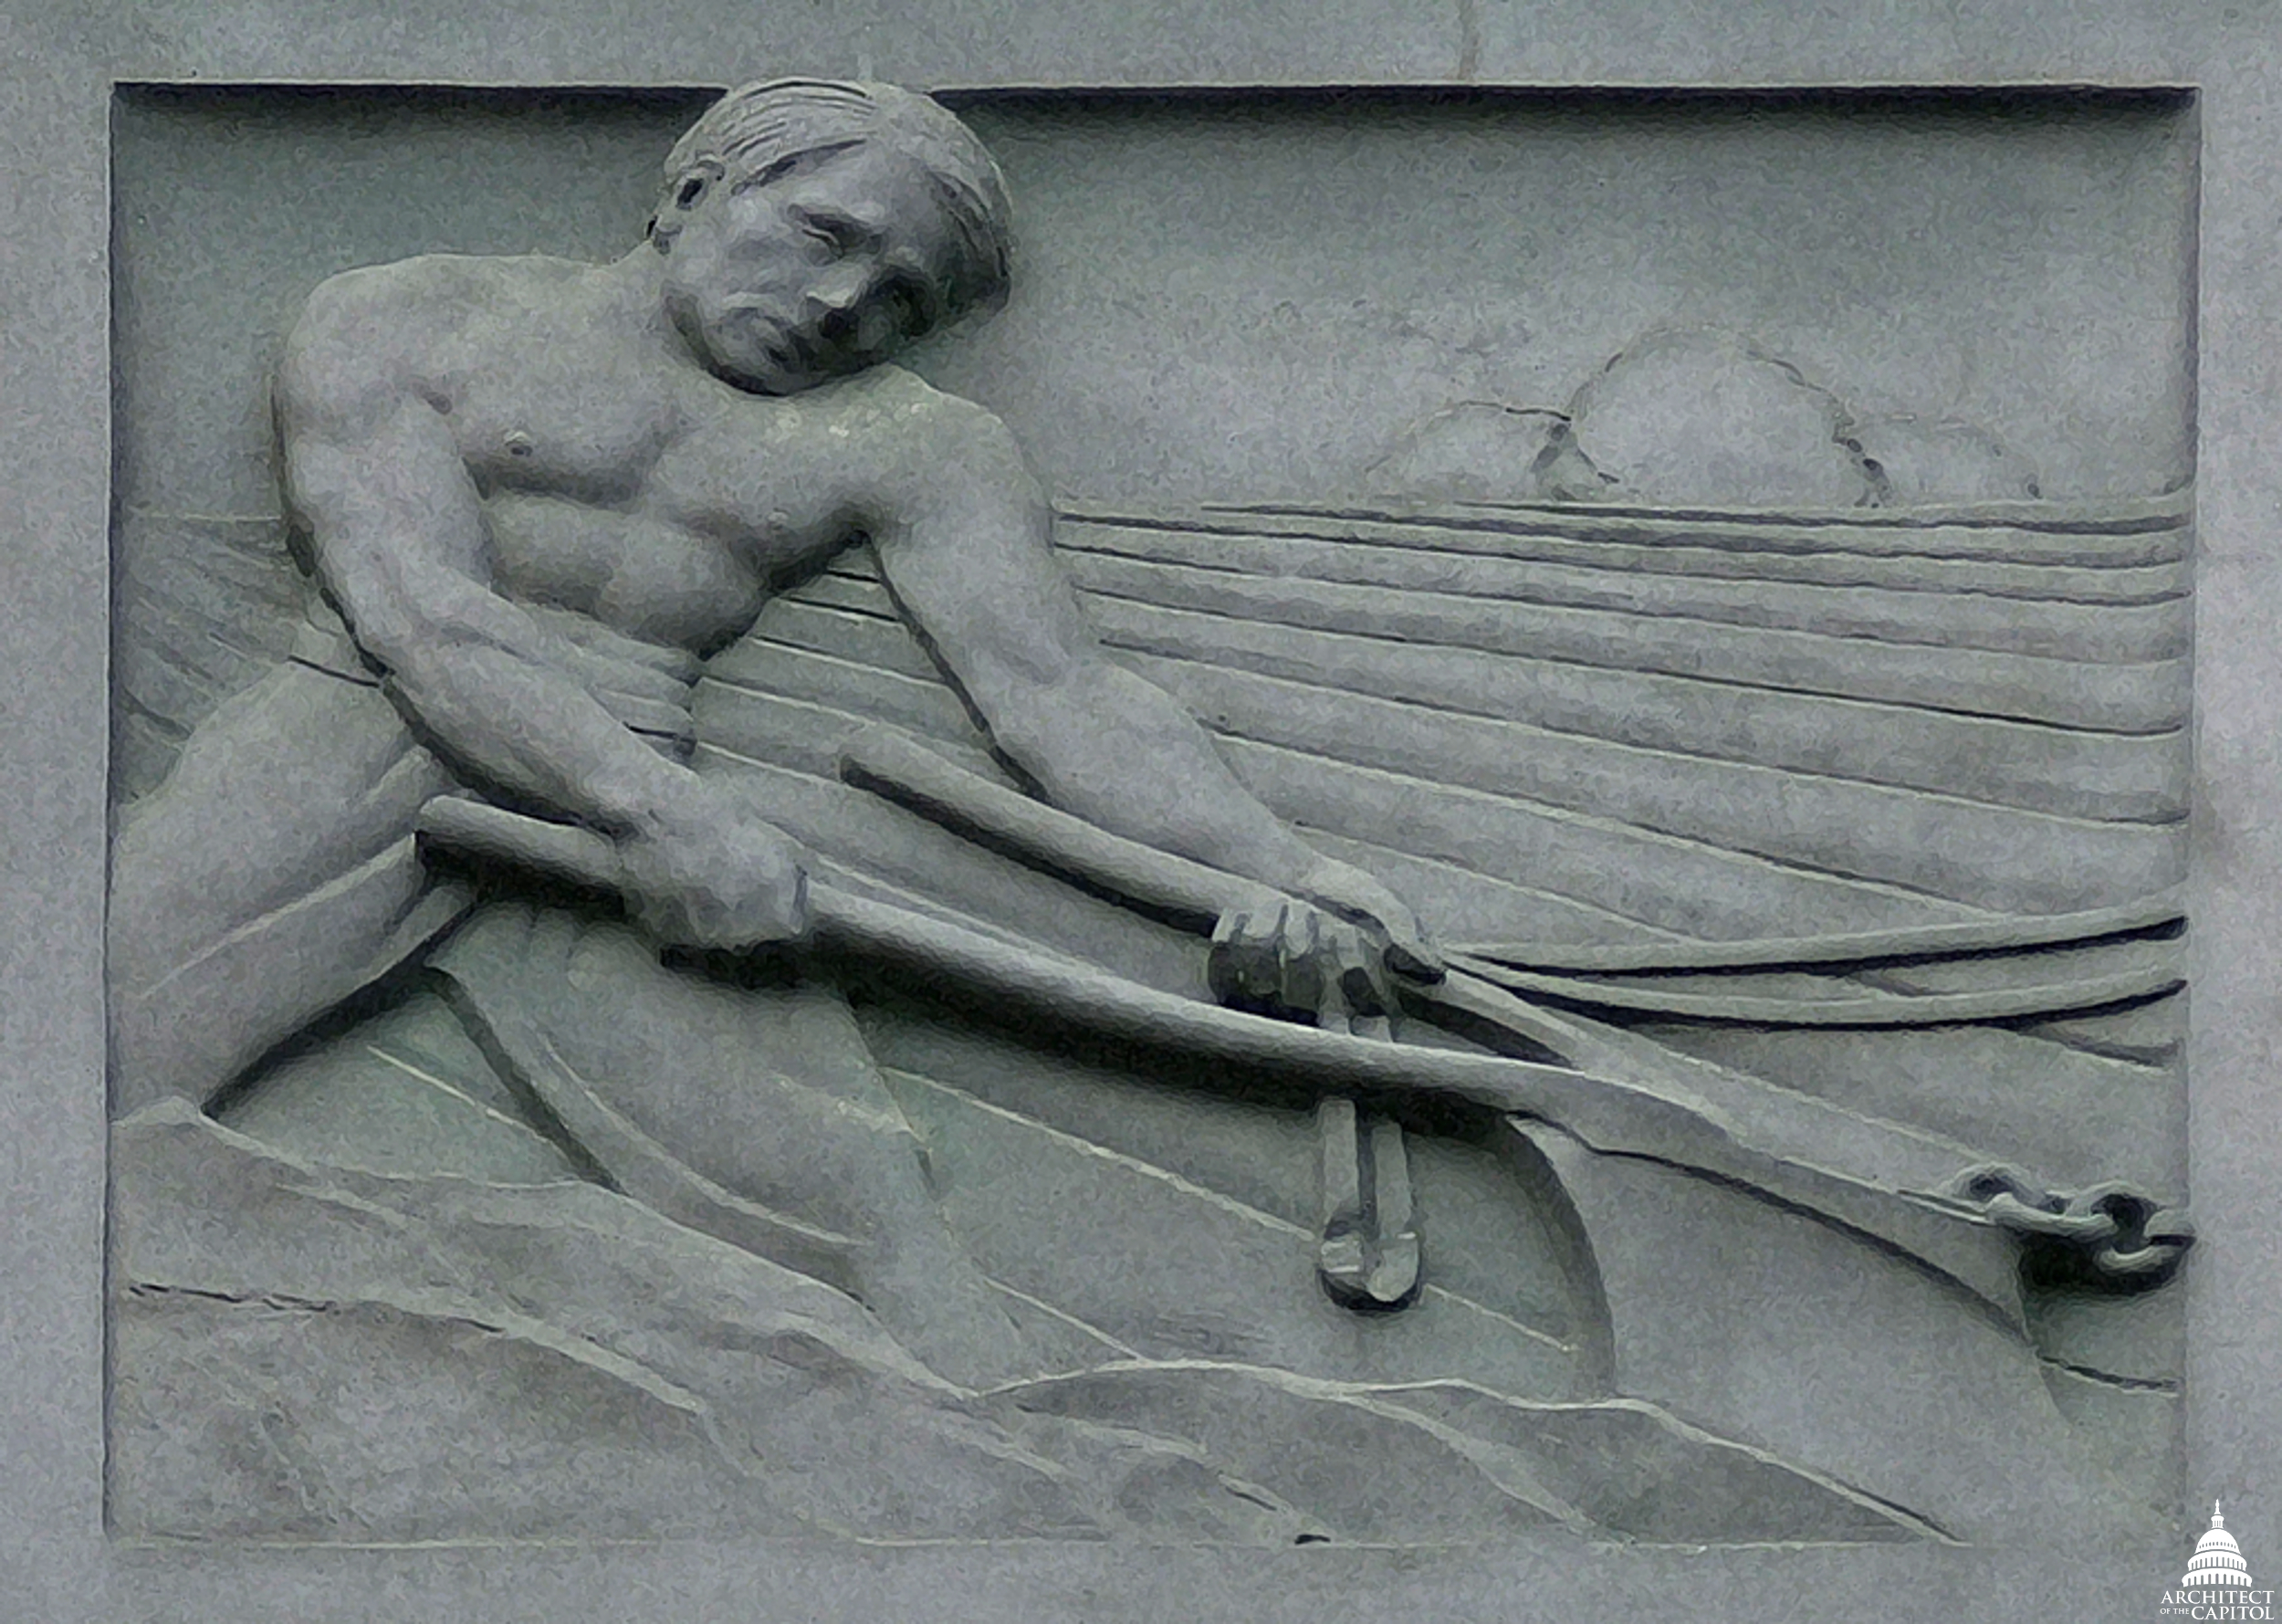 Farmer guides a plow on exterior panel of the Dirksen Senate Office Building.